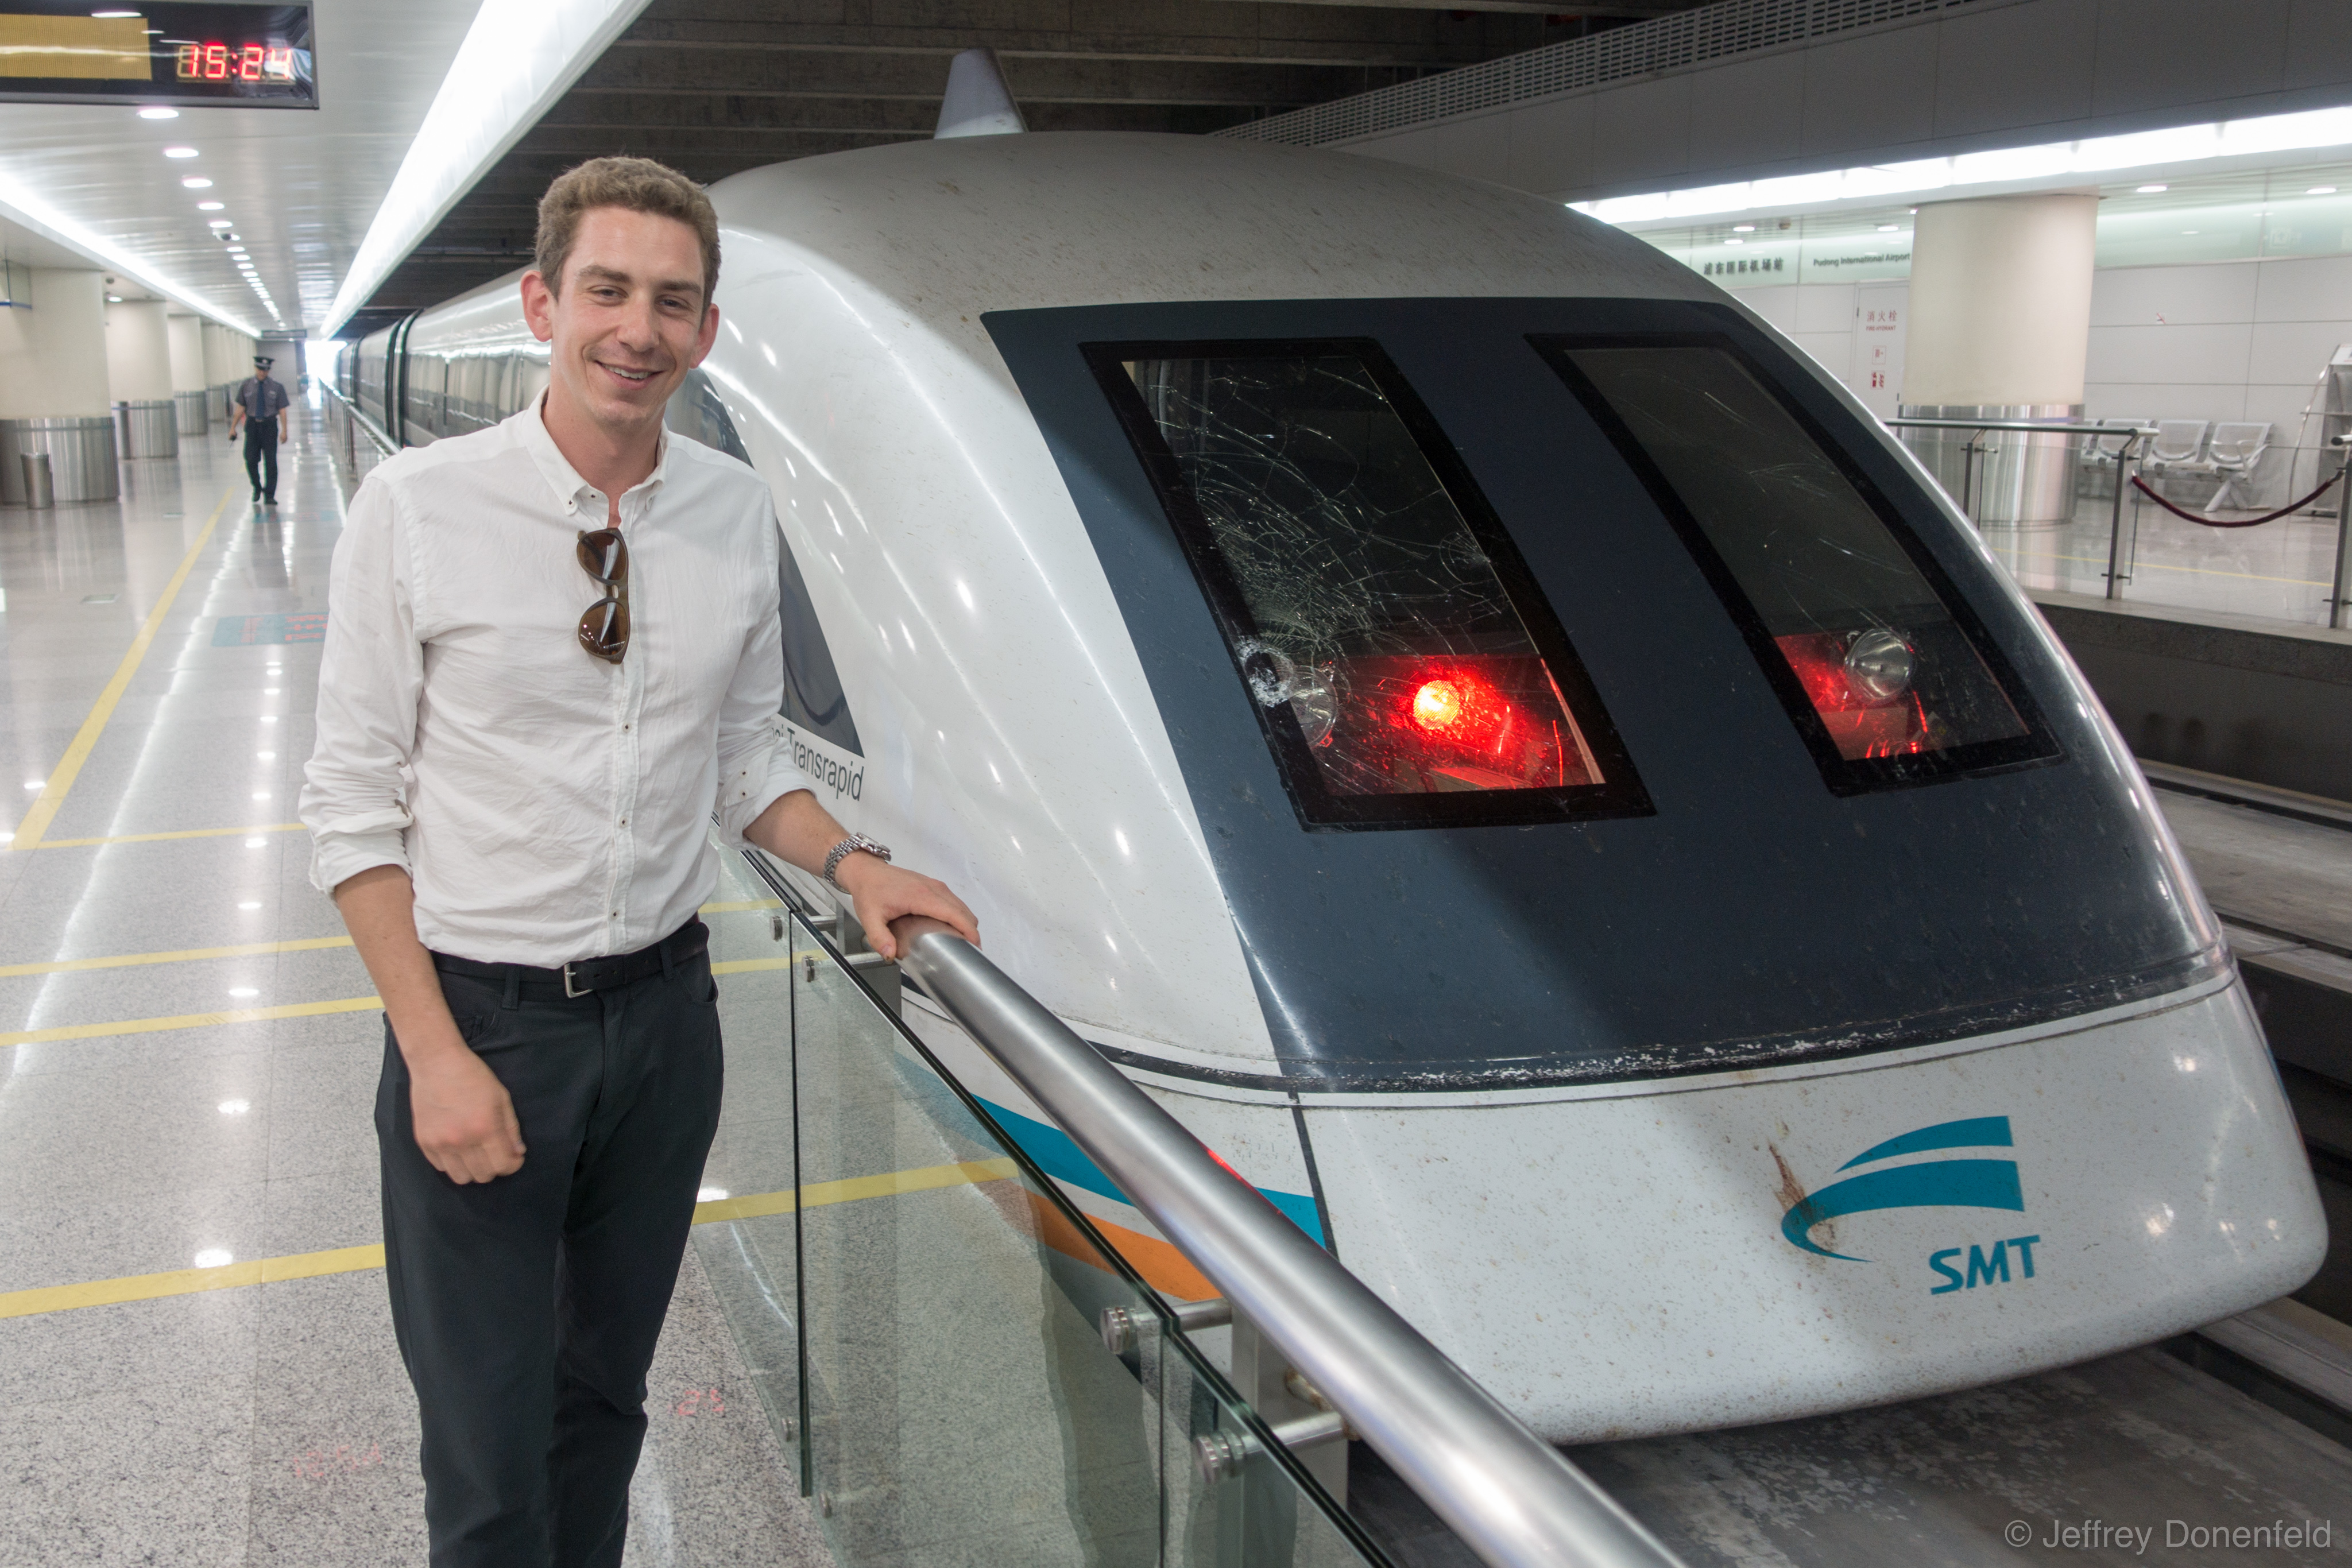 The Fastest Magnetic Train in the World: Riding the Shanghai Transrapid Maglev